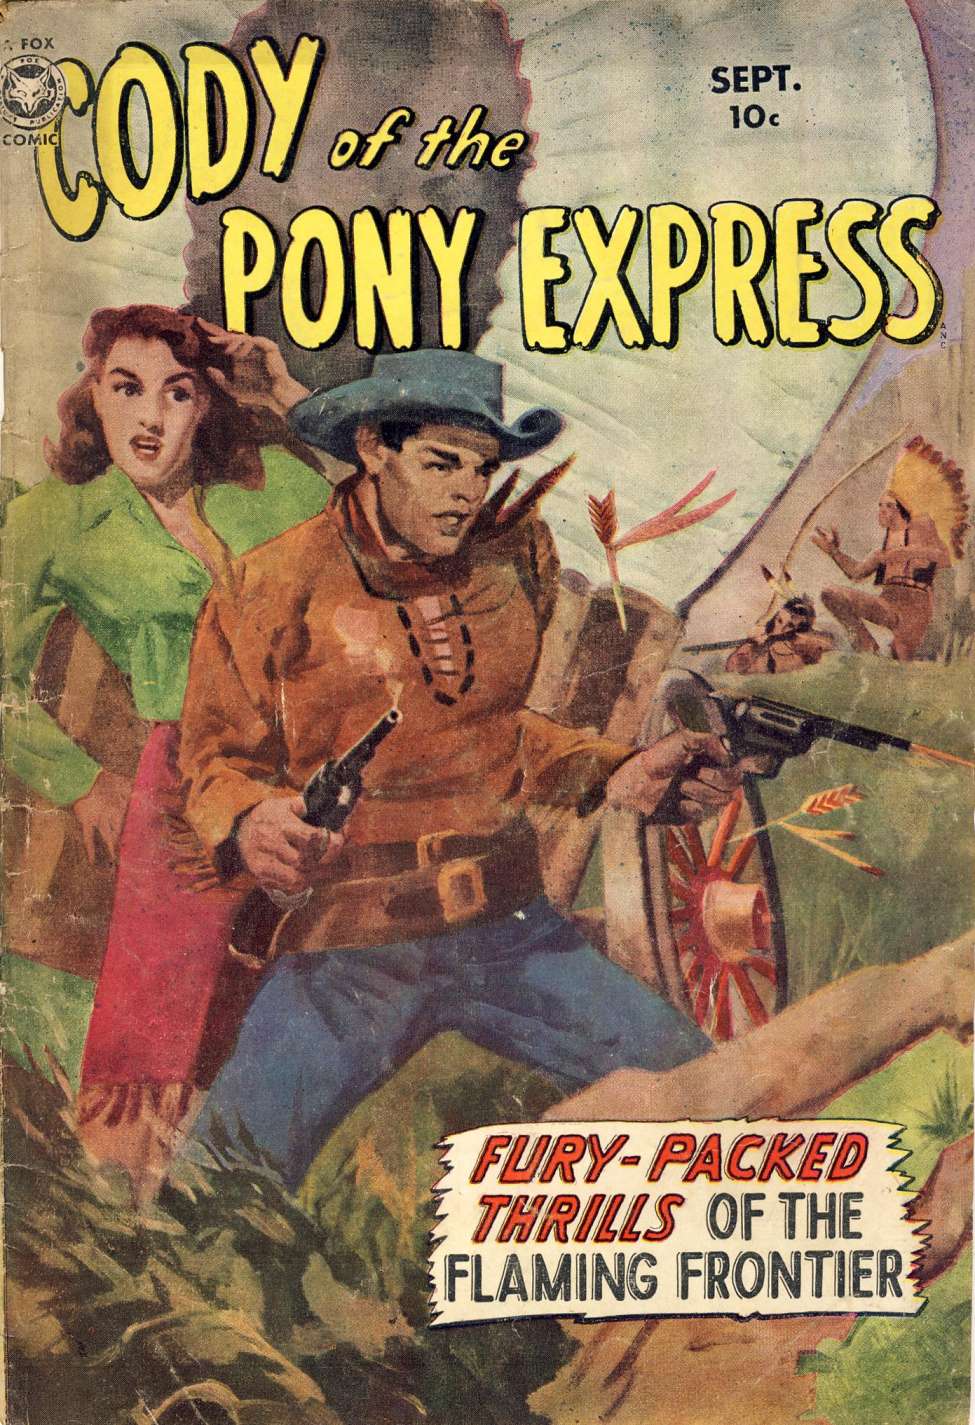 Comic Book Cover For Cody of the Pony Express 1